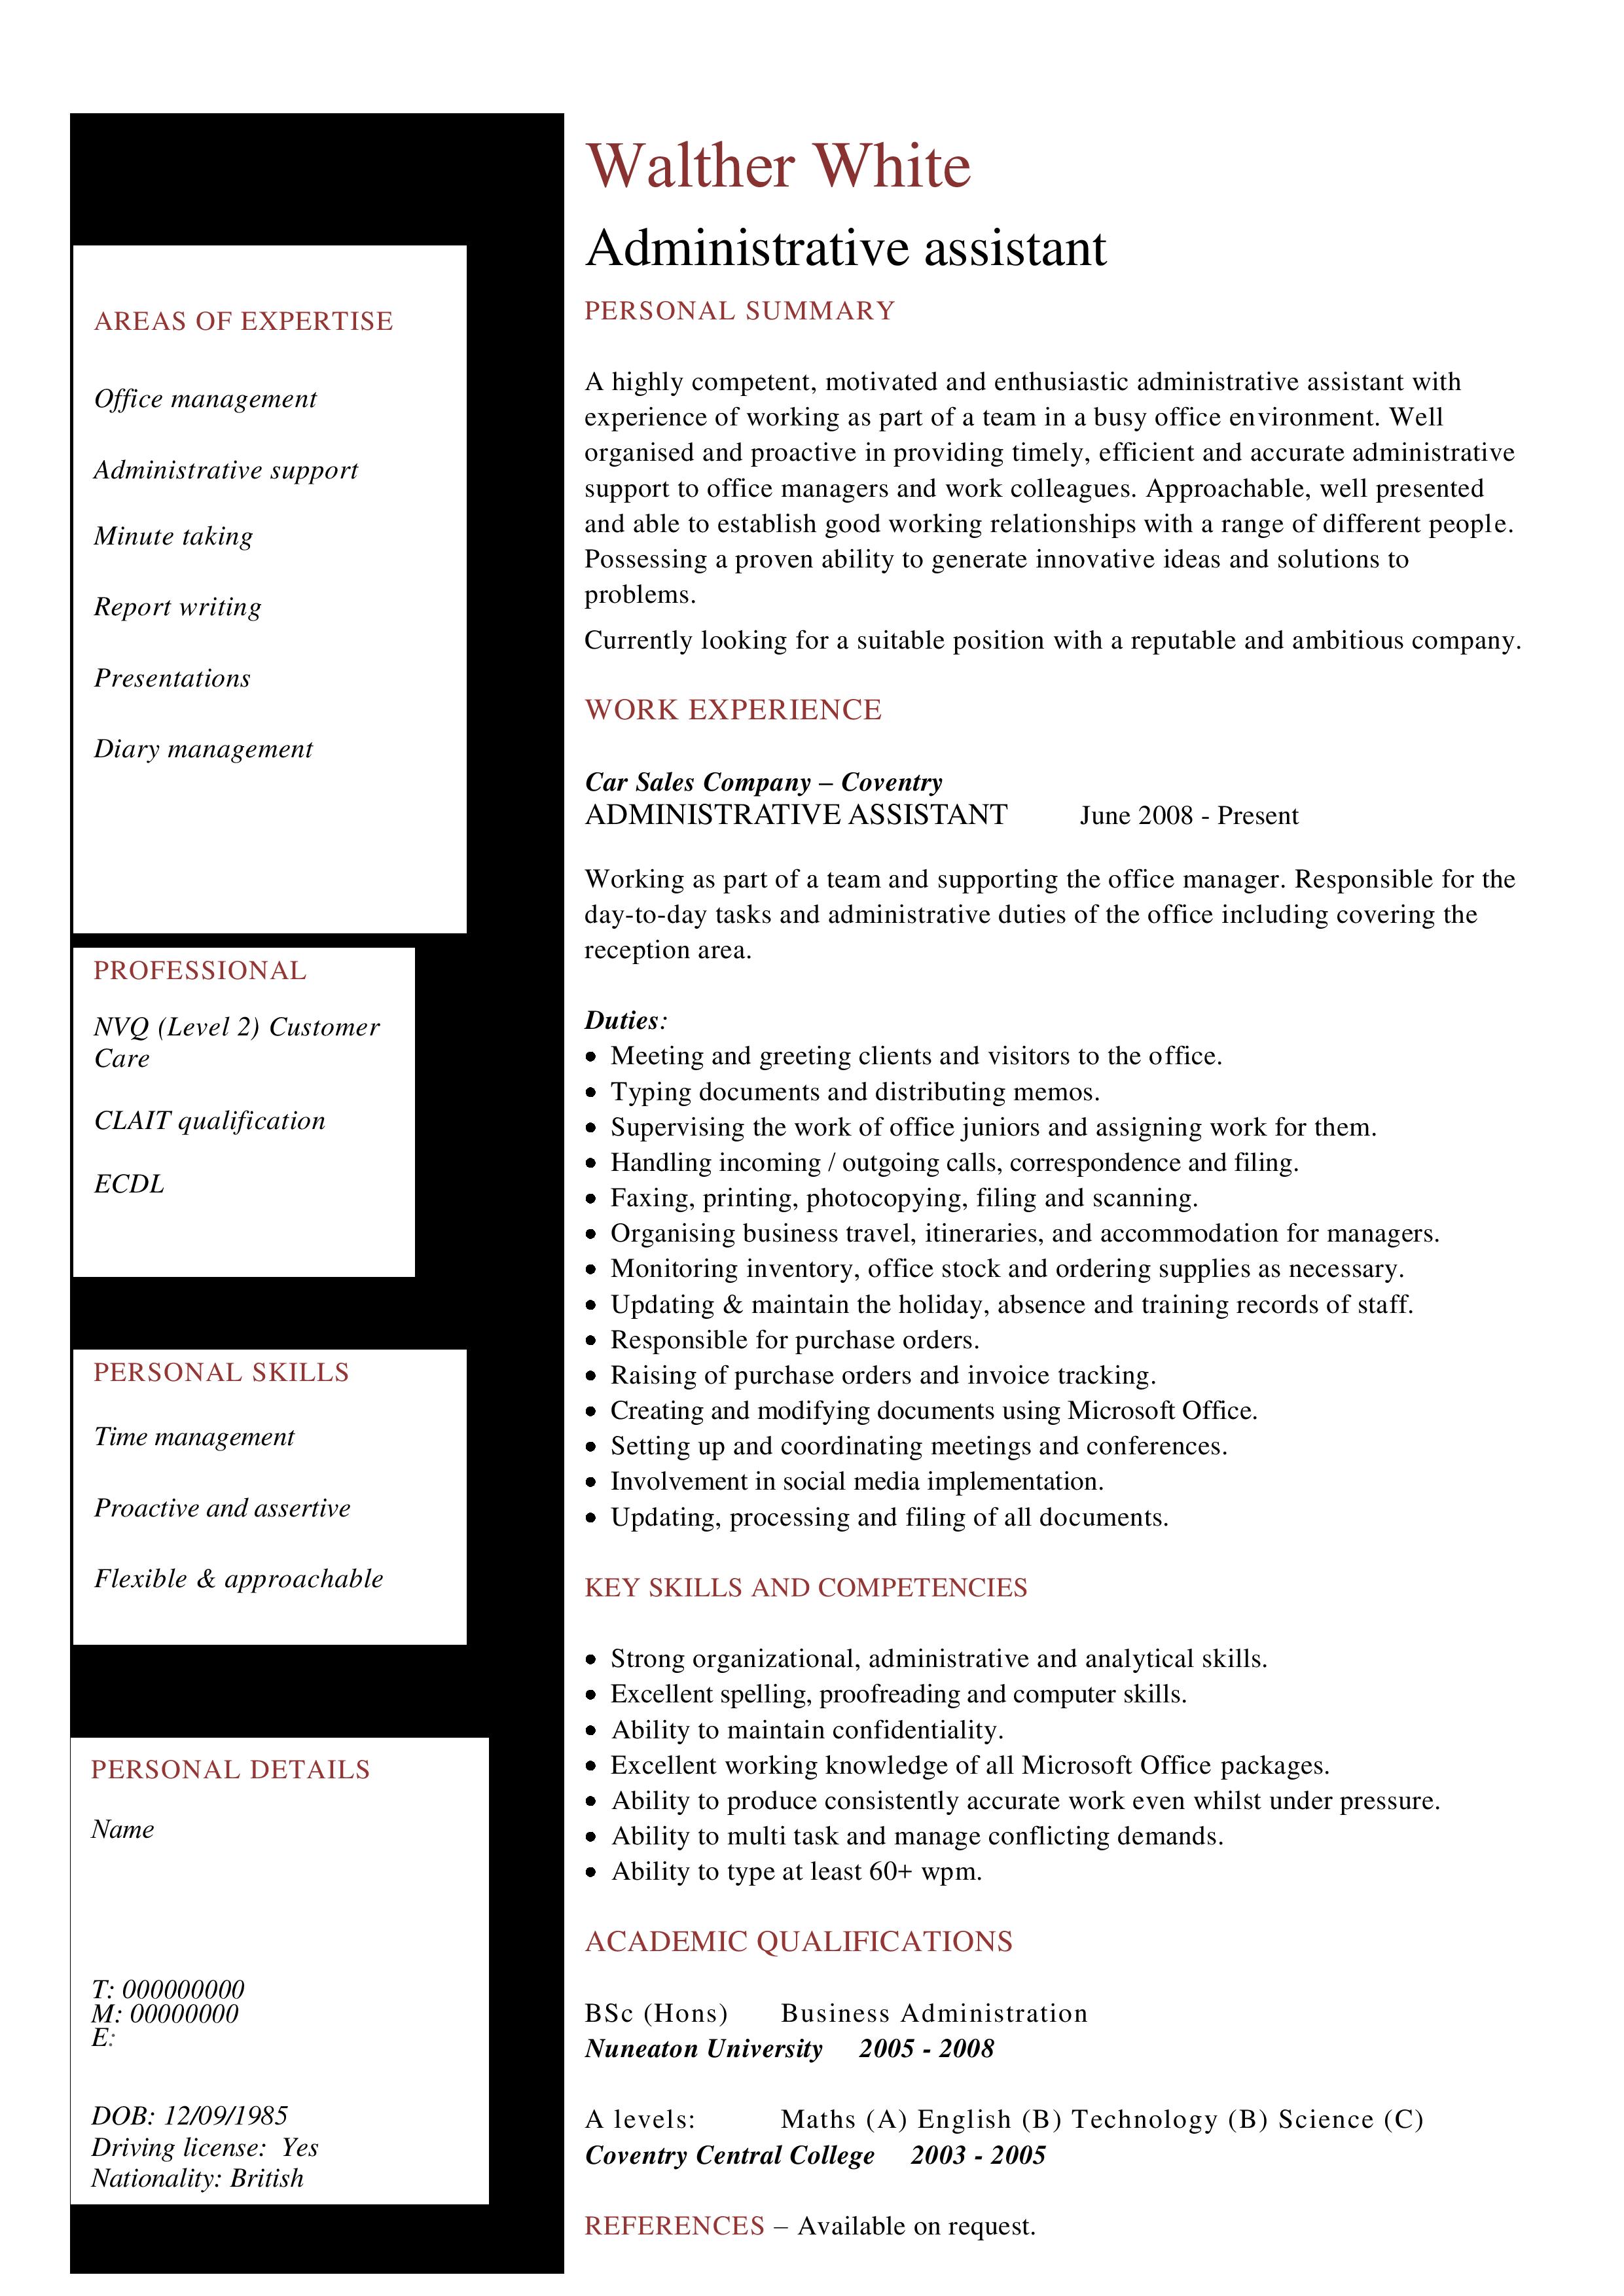 resume write in experience